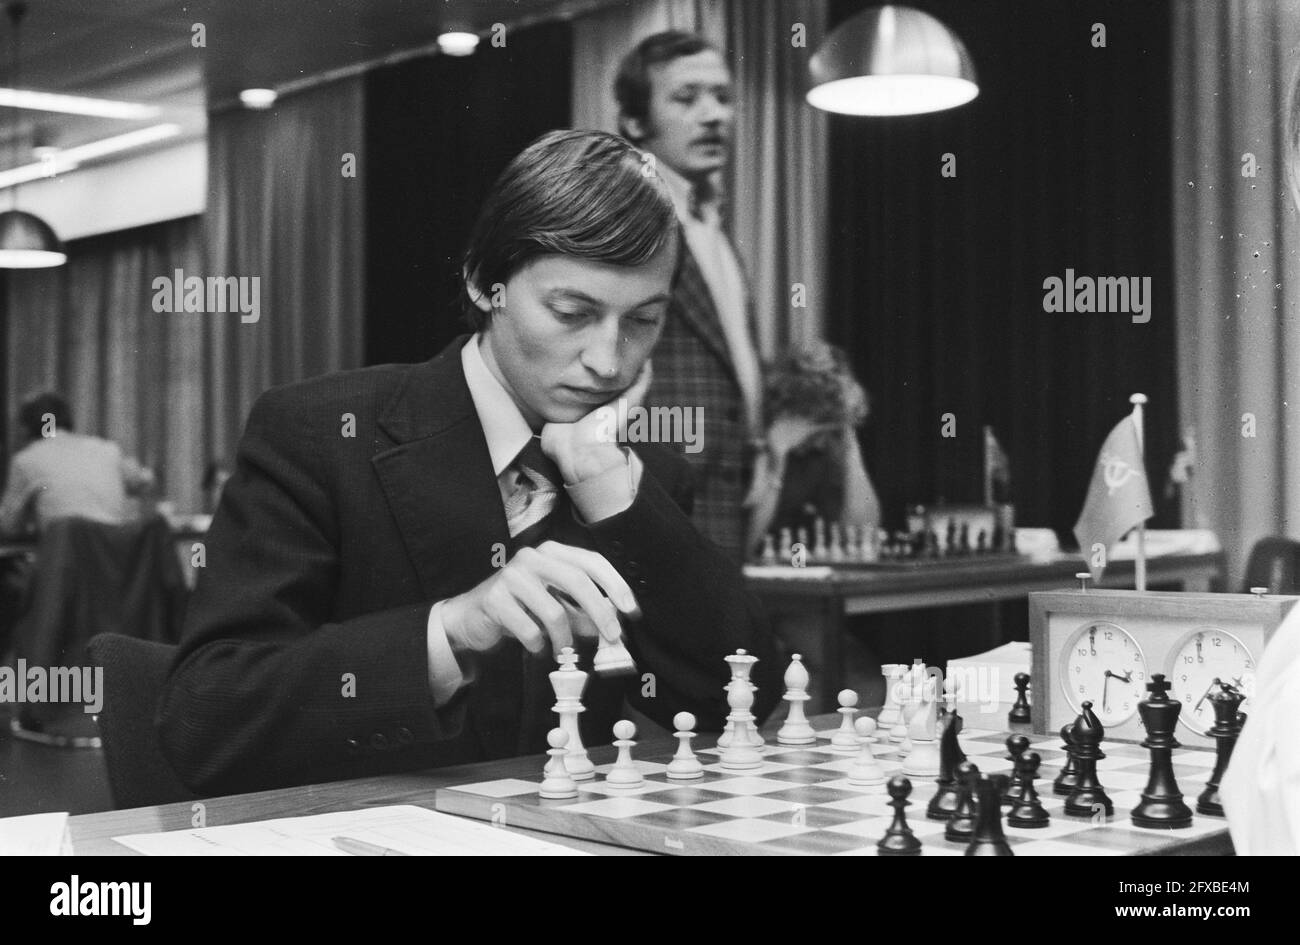 Karpov (l) plays against Hort; Timman (standing) looks on, July 10, 1980, chess  games, chess, chess players, tournaments, The Netherlands, 20th century  press agency photo, news to remember, documentary, historic photography  1945-1990